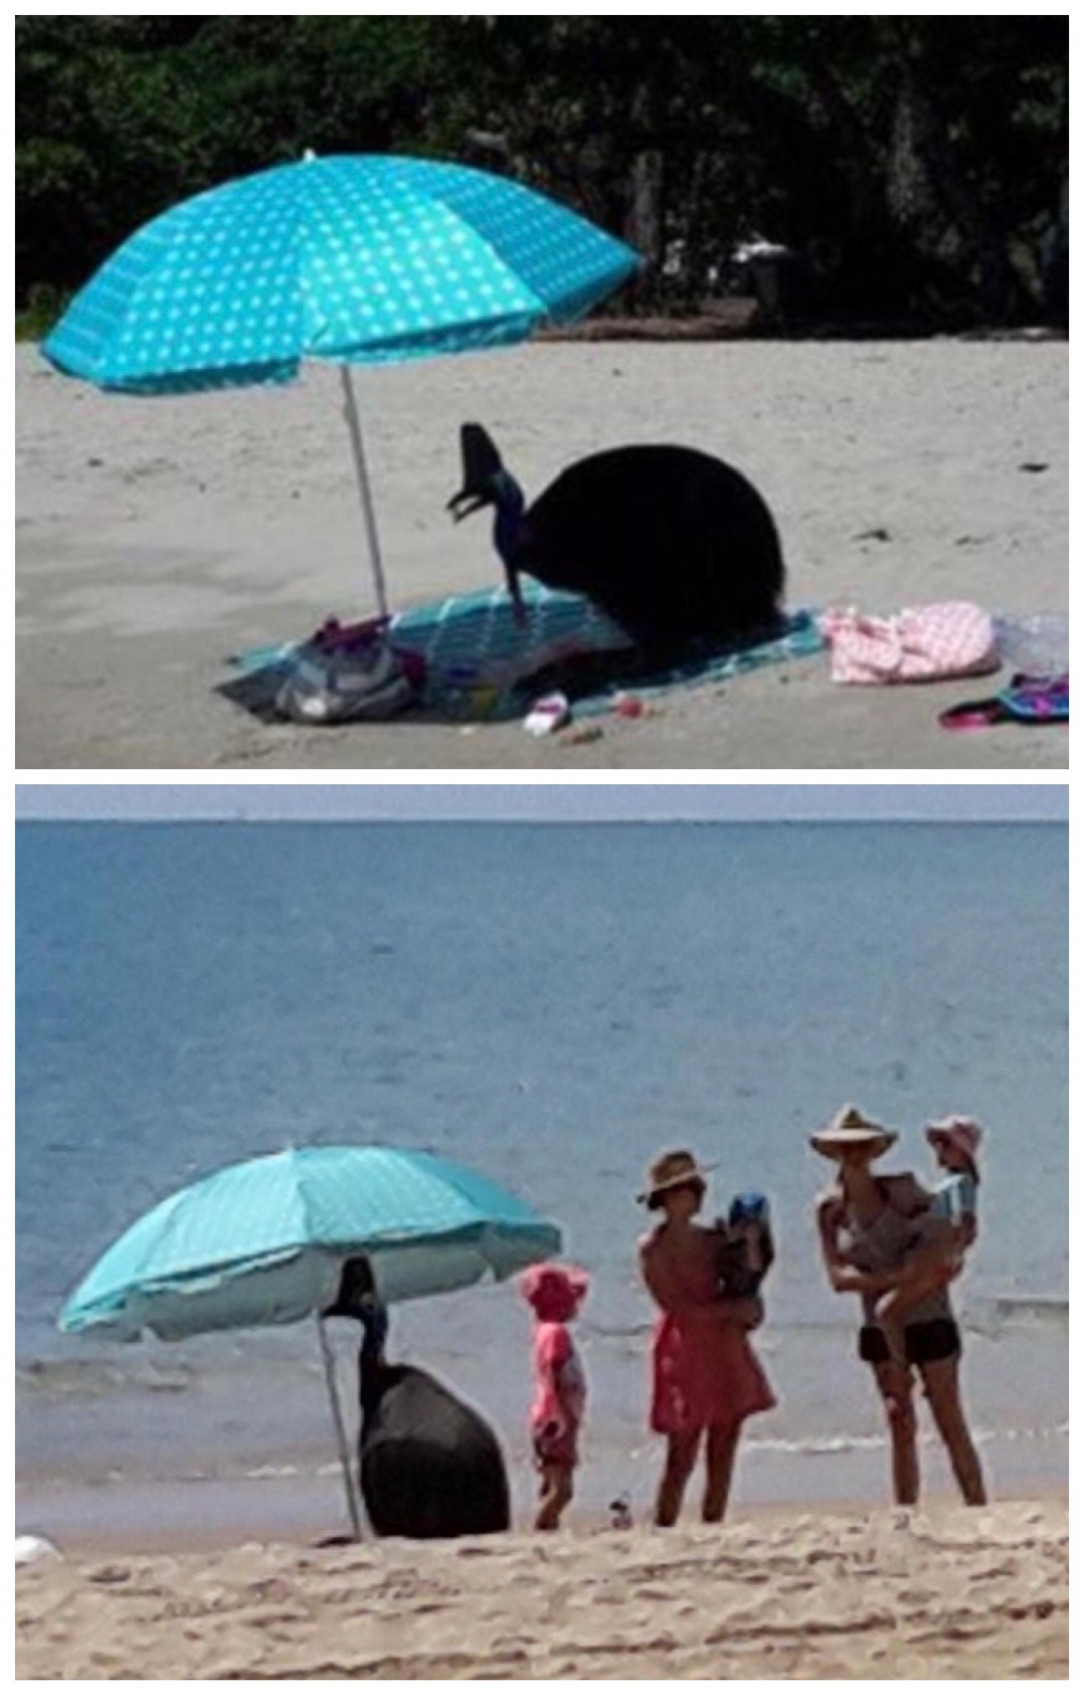 This cassowary kicked an Australian family out from under their beach umbrella so it could cool off in the shade and eat some grapes